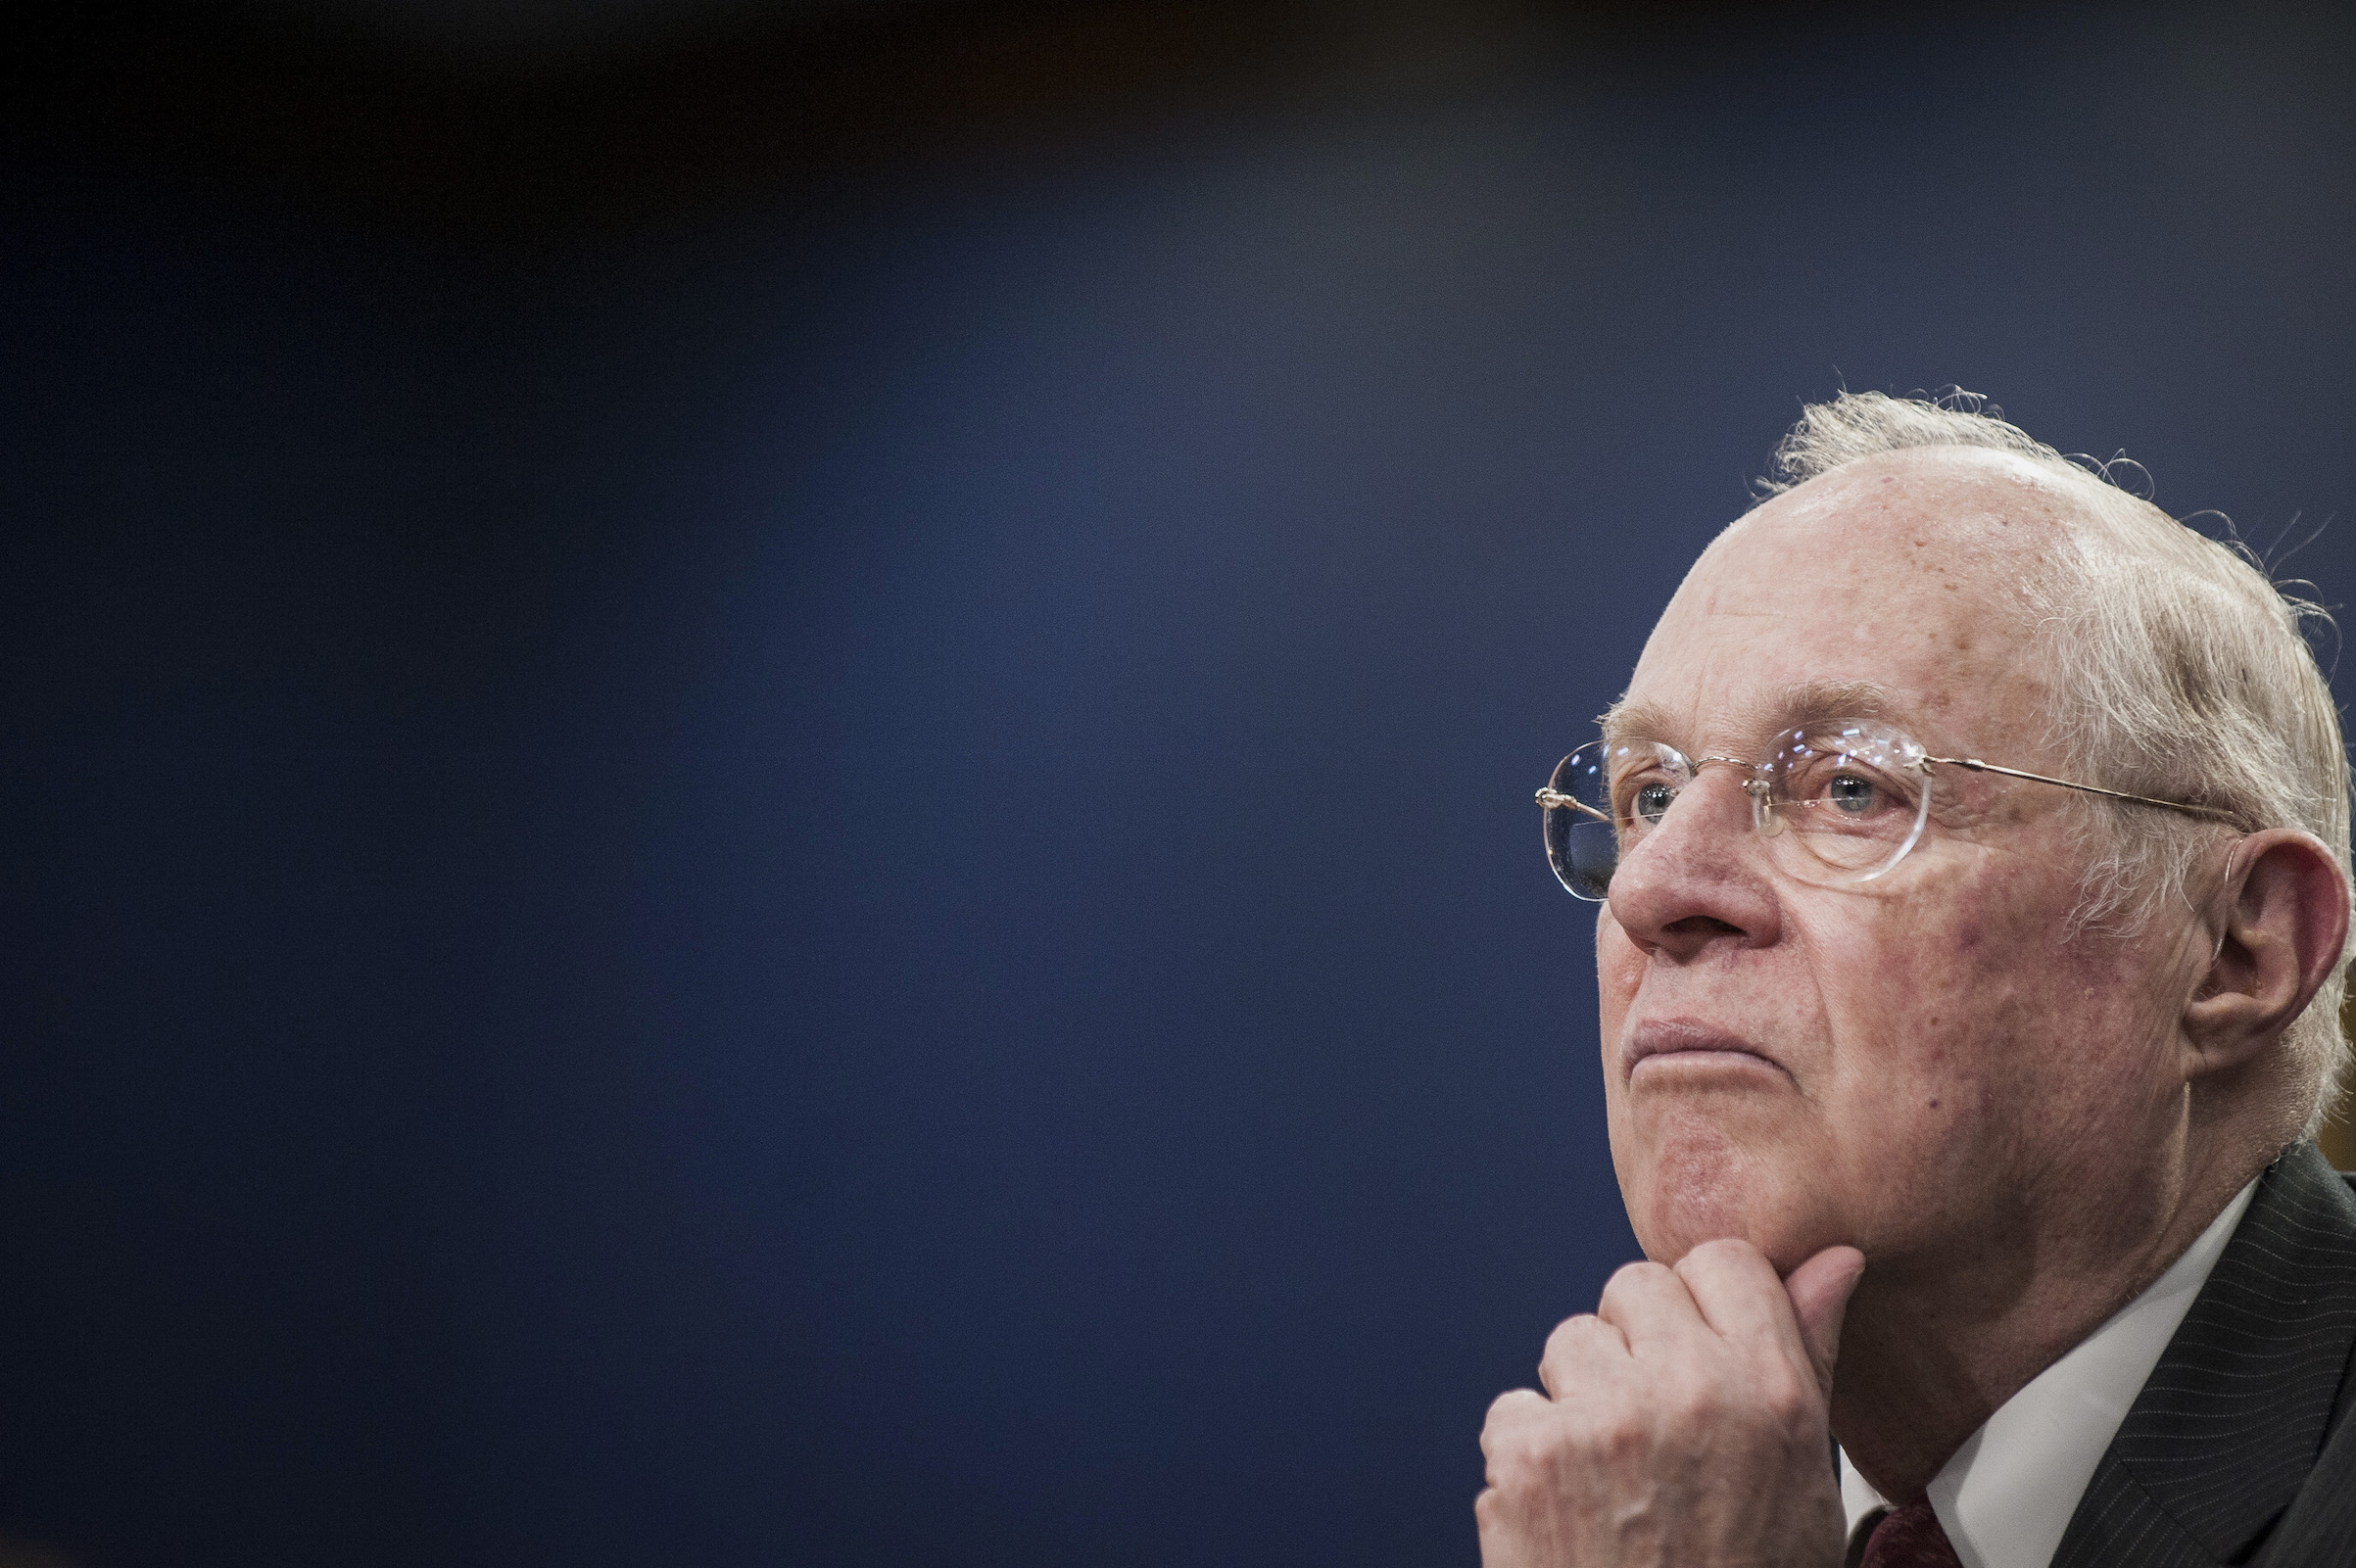 Supreme Court Justice Anthony Kennedy testifies before the Financial Services and General Government Subcommittee during a hearing on the budget  for the Supreme Court in Washington, D.C., on March 23, 2015. (Pete Marovich—Bloomberg via Getty Images)